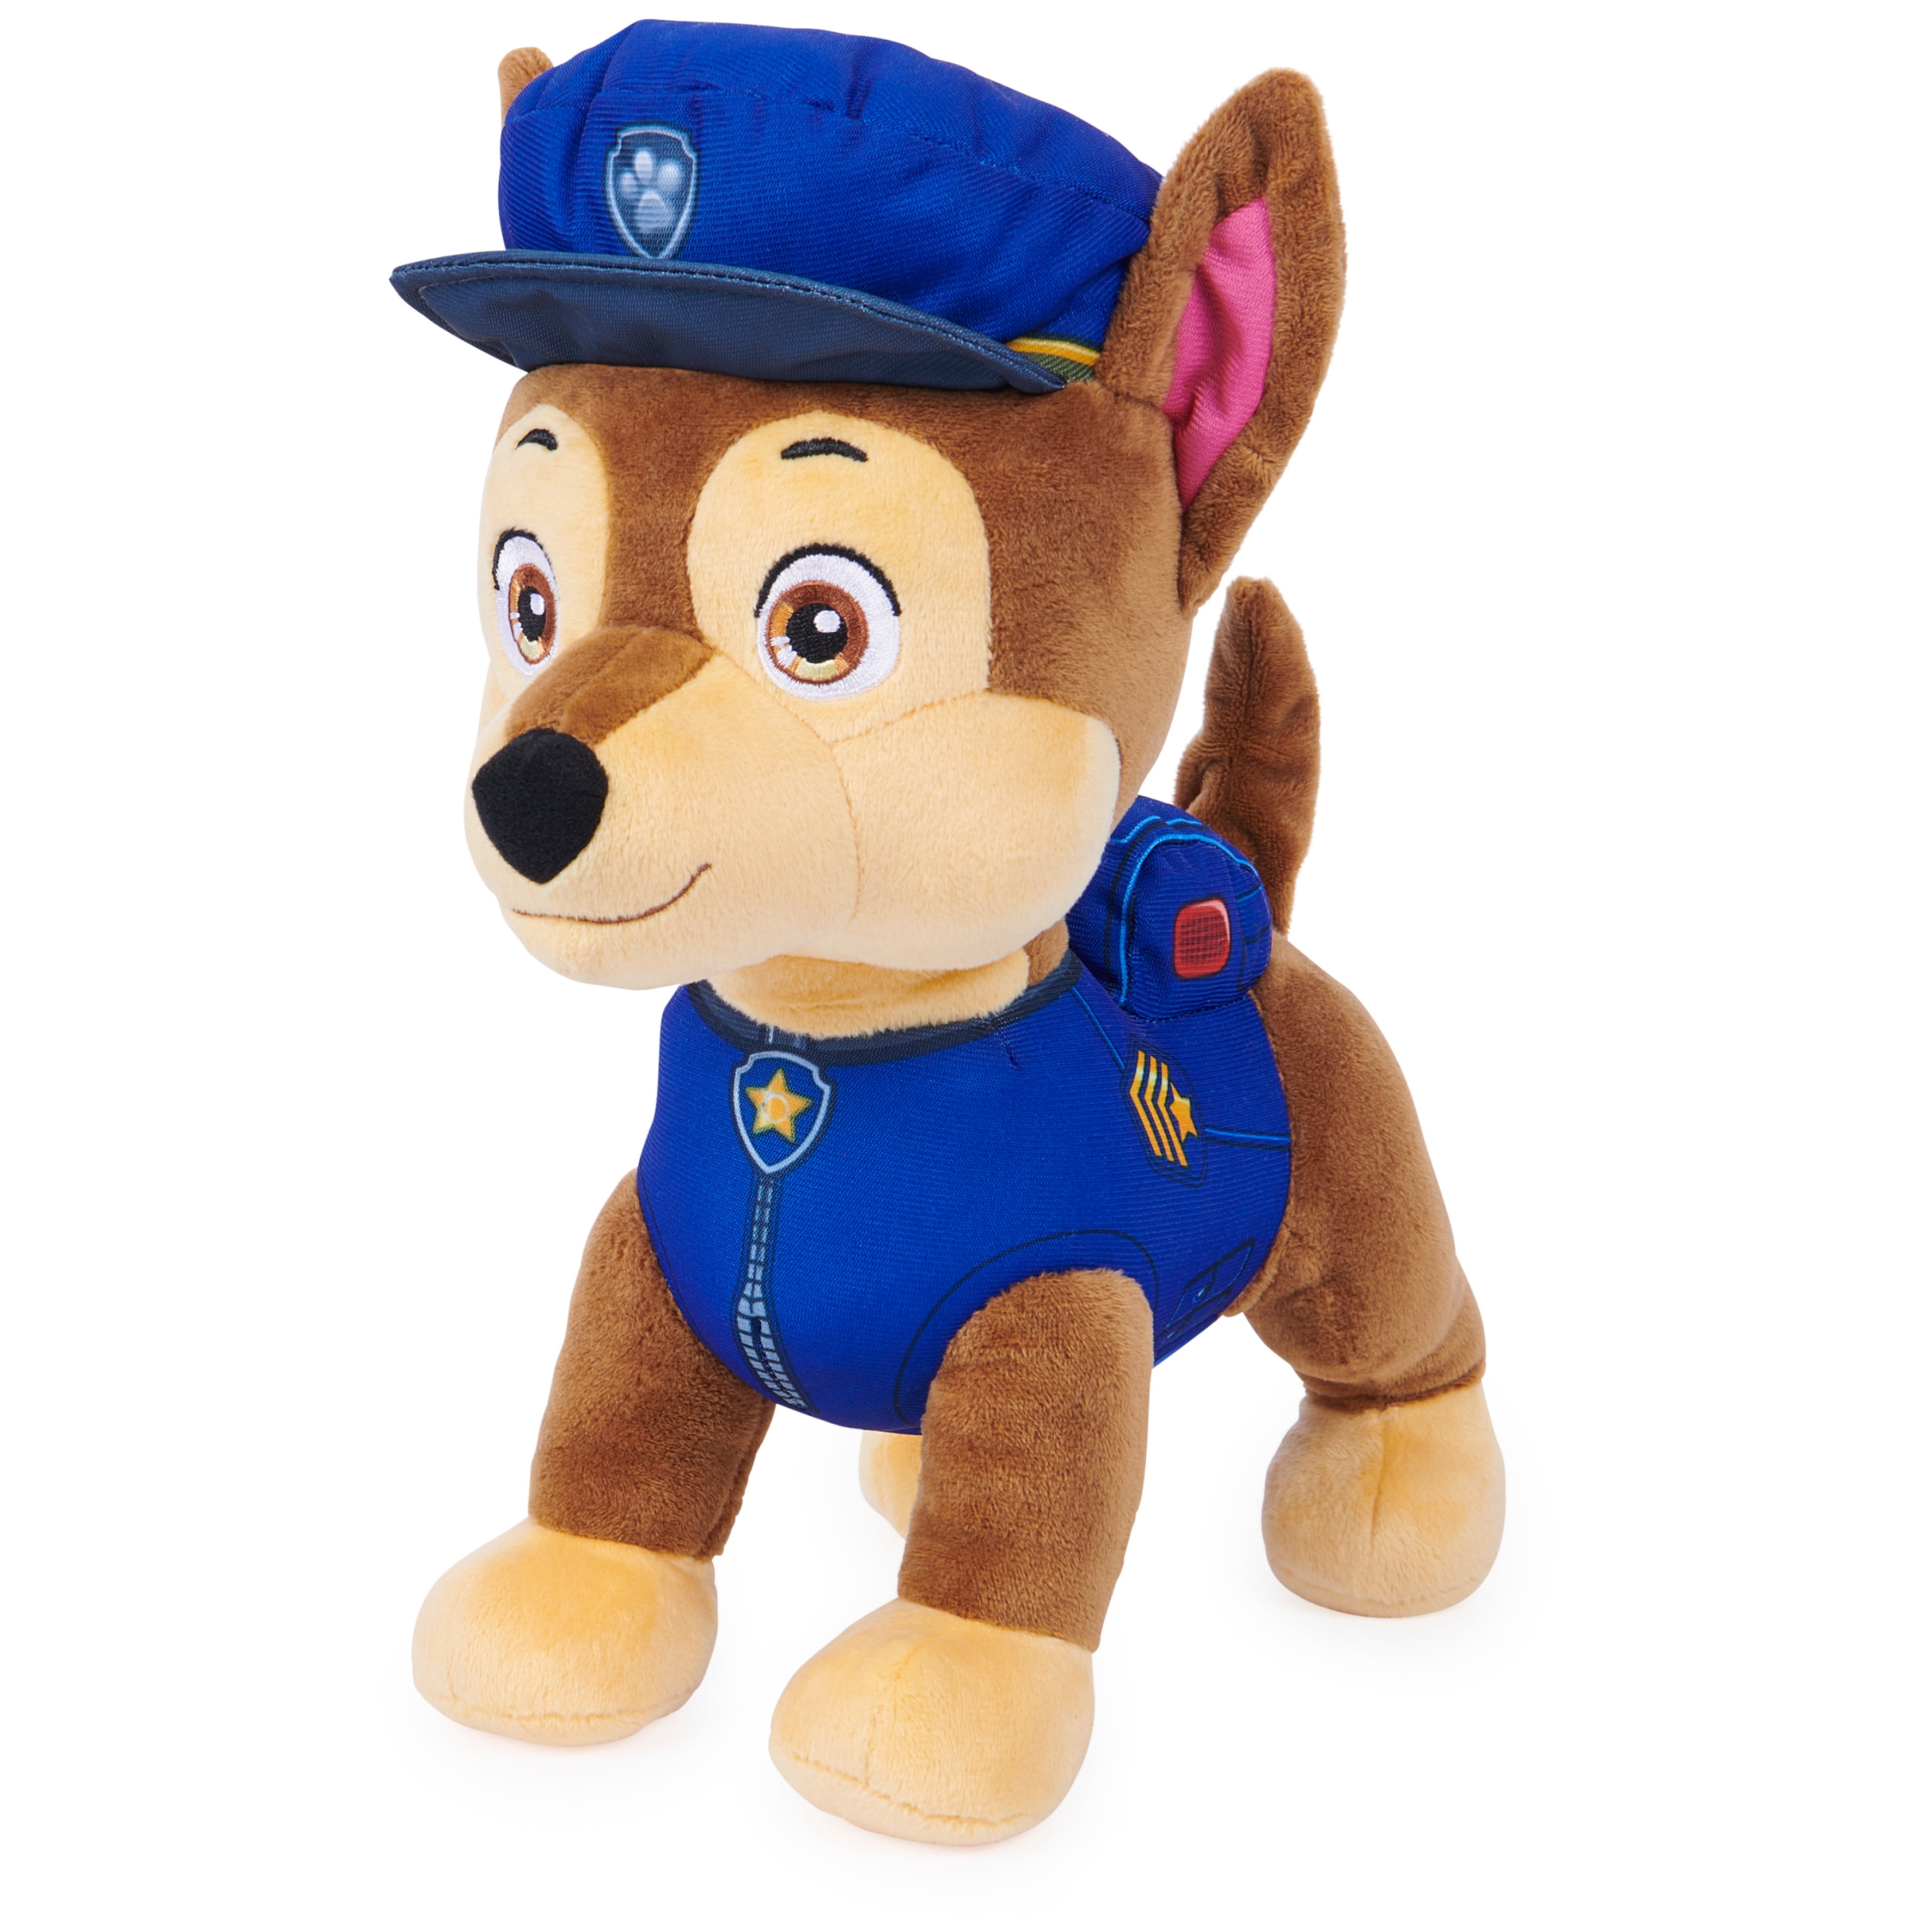 PAW Patrol, Talking Chase 12-Inch-Tall Interactive Plush Toy, for Ages 3 and up